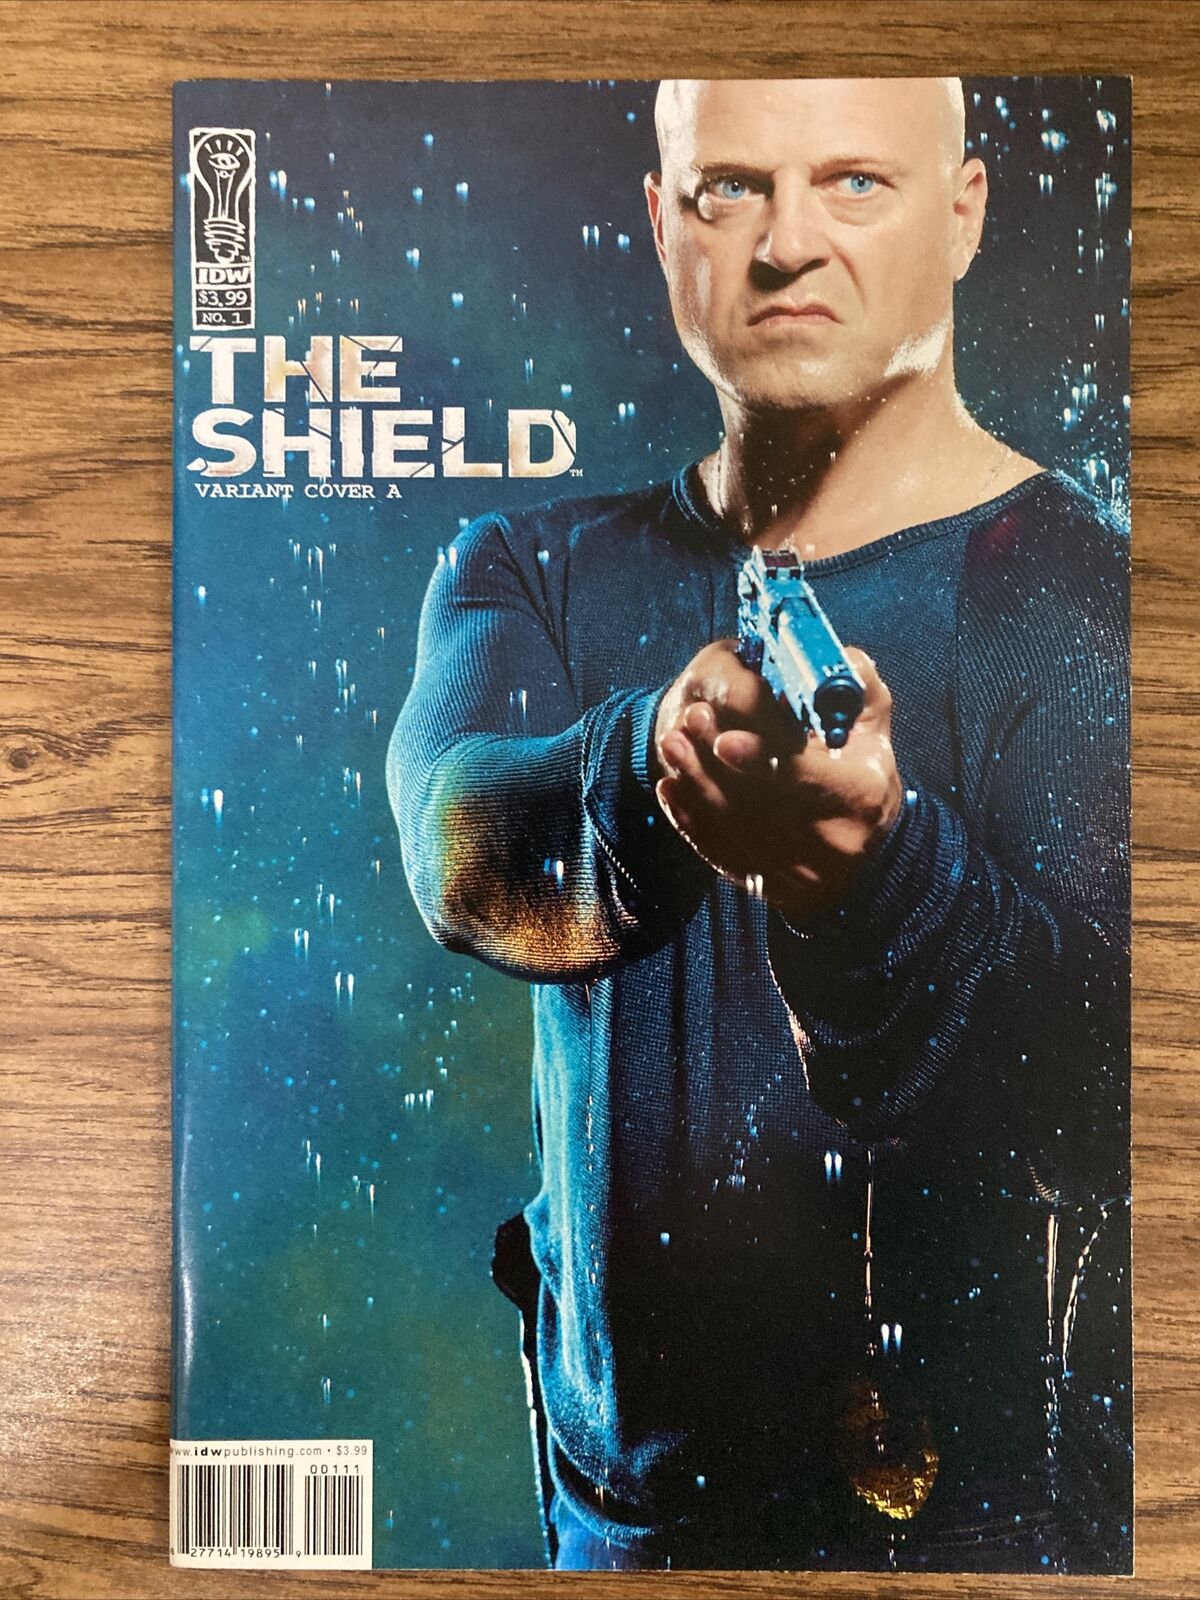 THE SHIELD #1 — Variant A: IDW Comic Book. Unread Clean Copy. Combined Shipping.